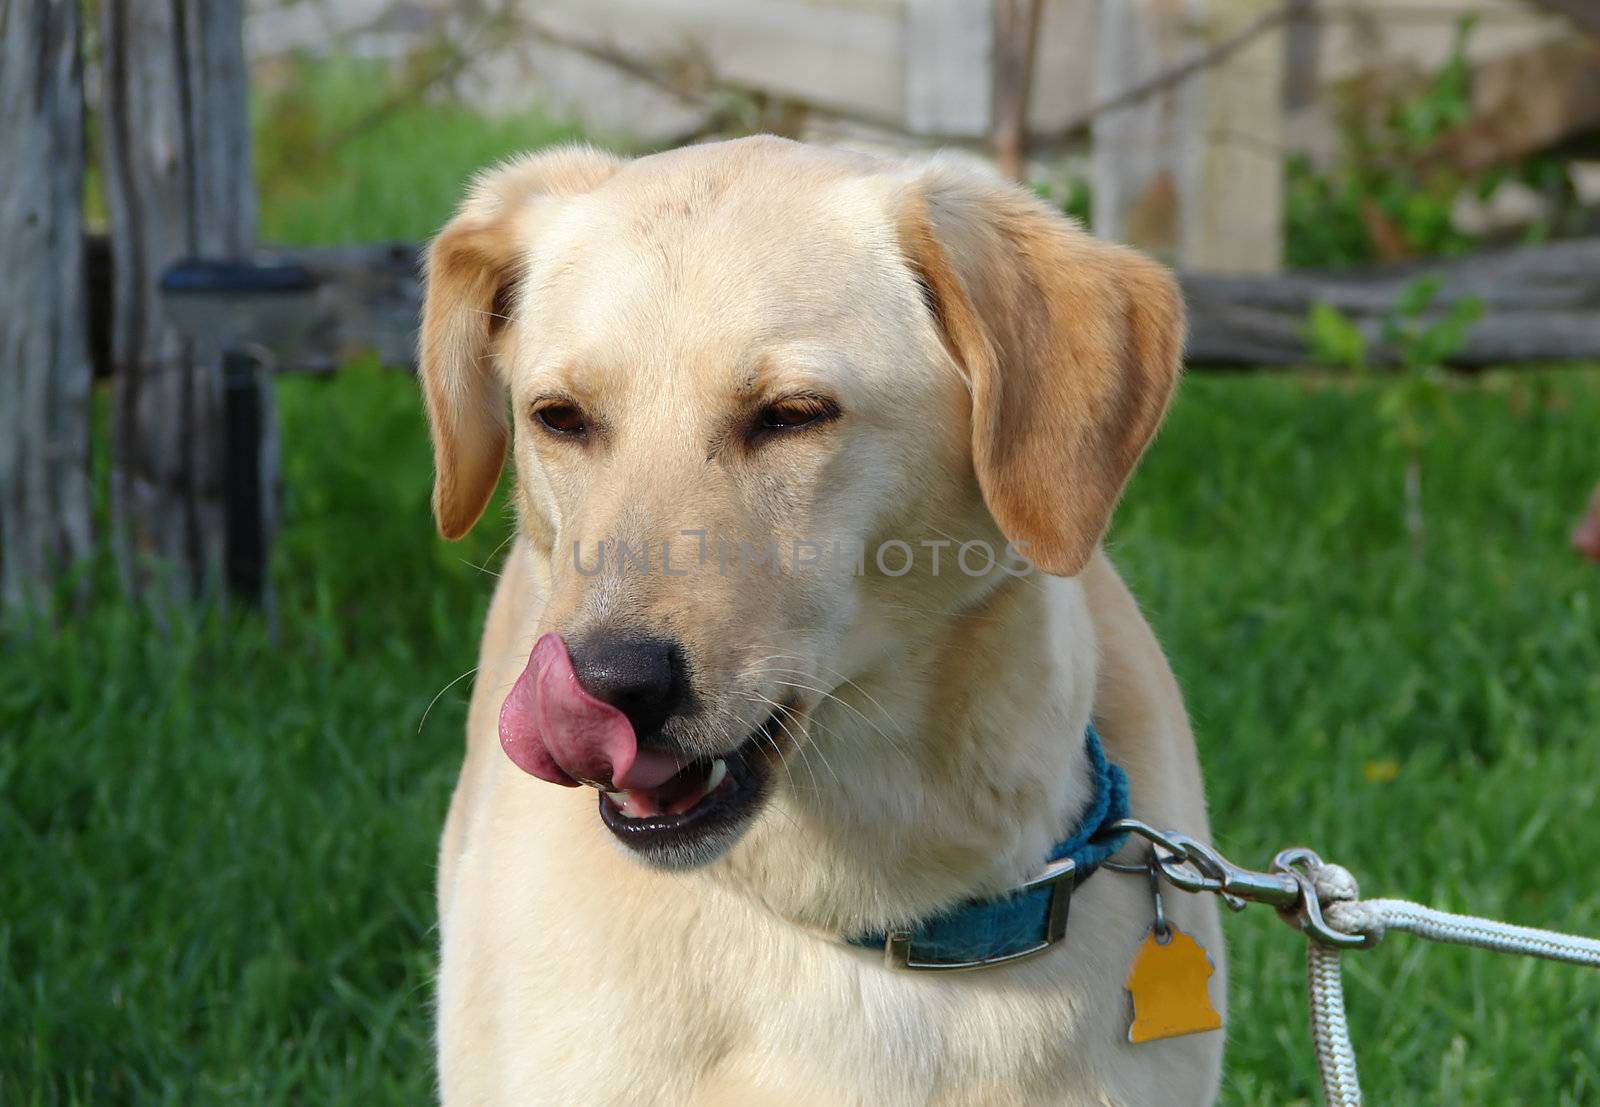 Labrador licking its nose by Mirage3